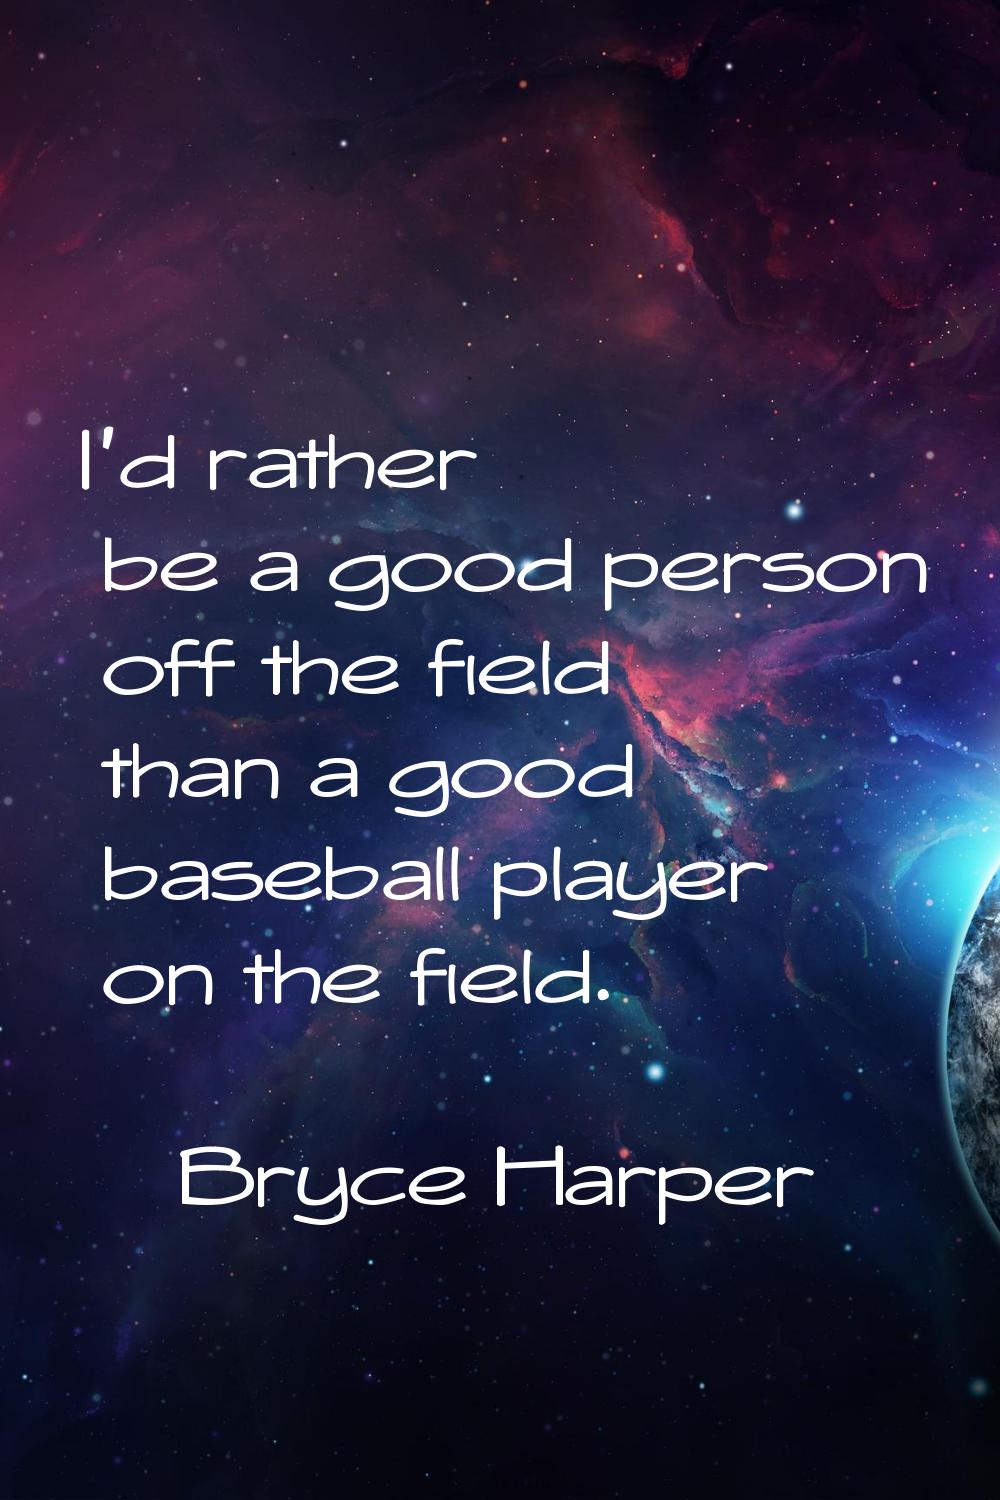 I'd rather be a good person off the field than a good baseball player on the field.